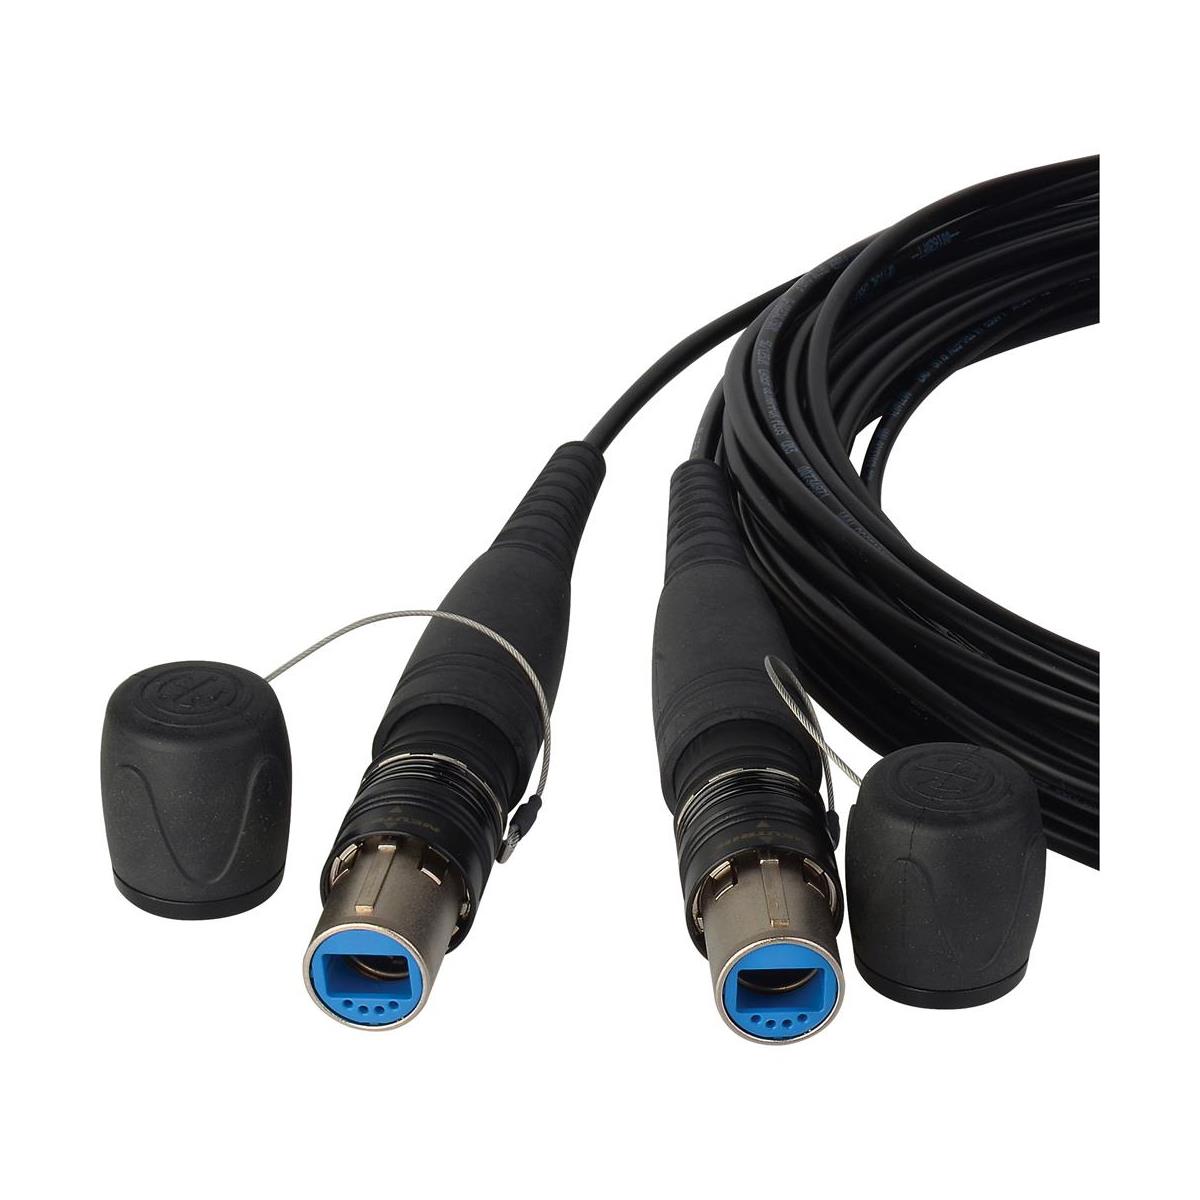 Image of Camplex OpticalCON DUO to DUO Singlemode X-TREME Tactical Fiber Cable